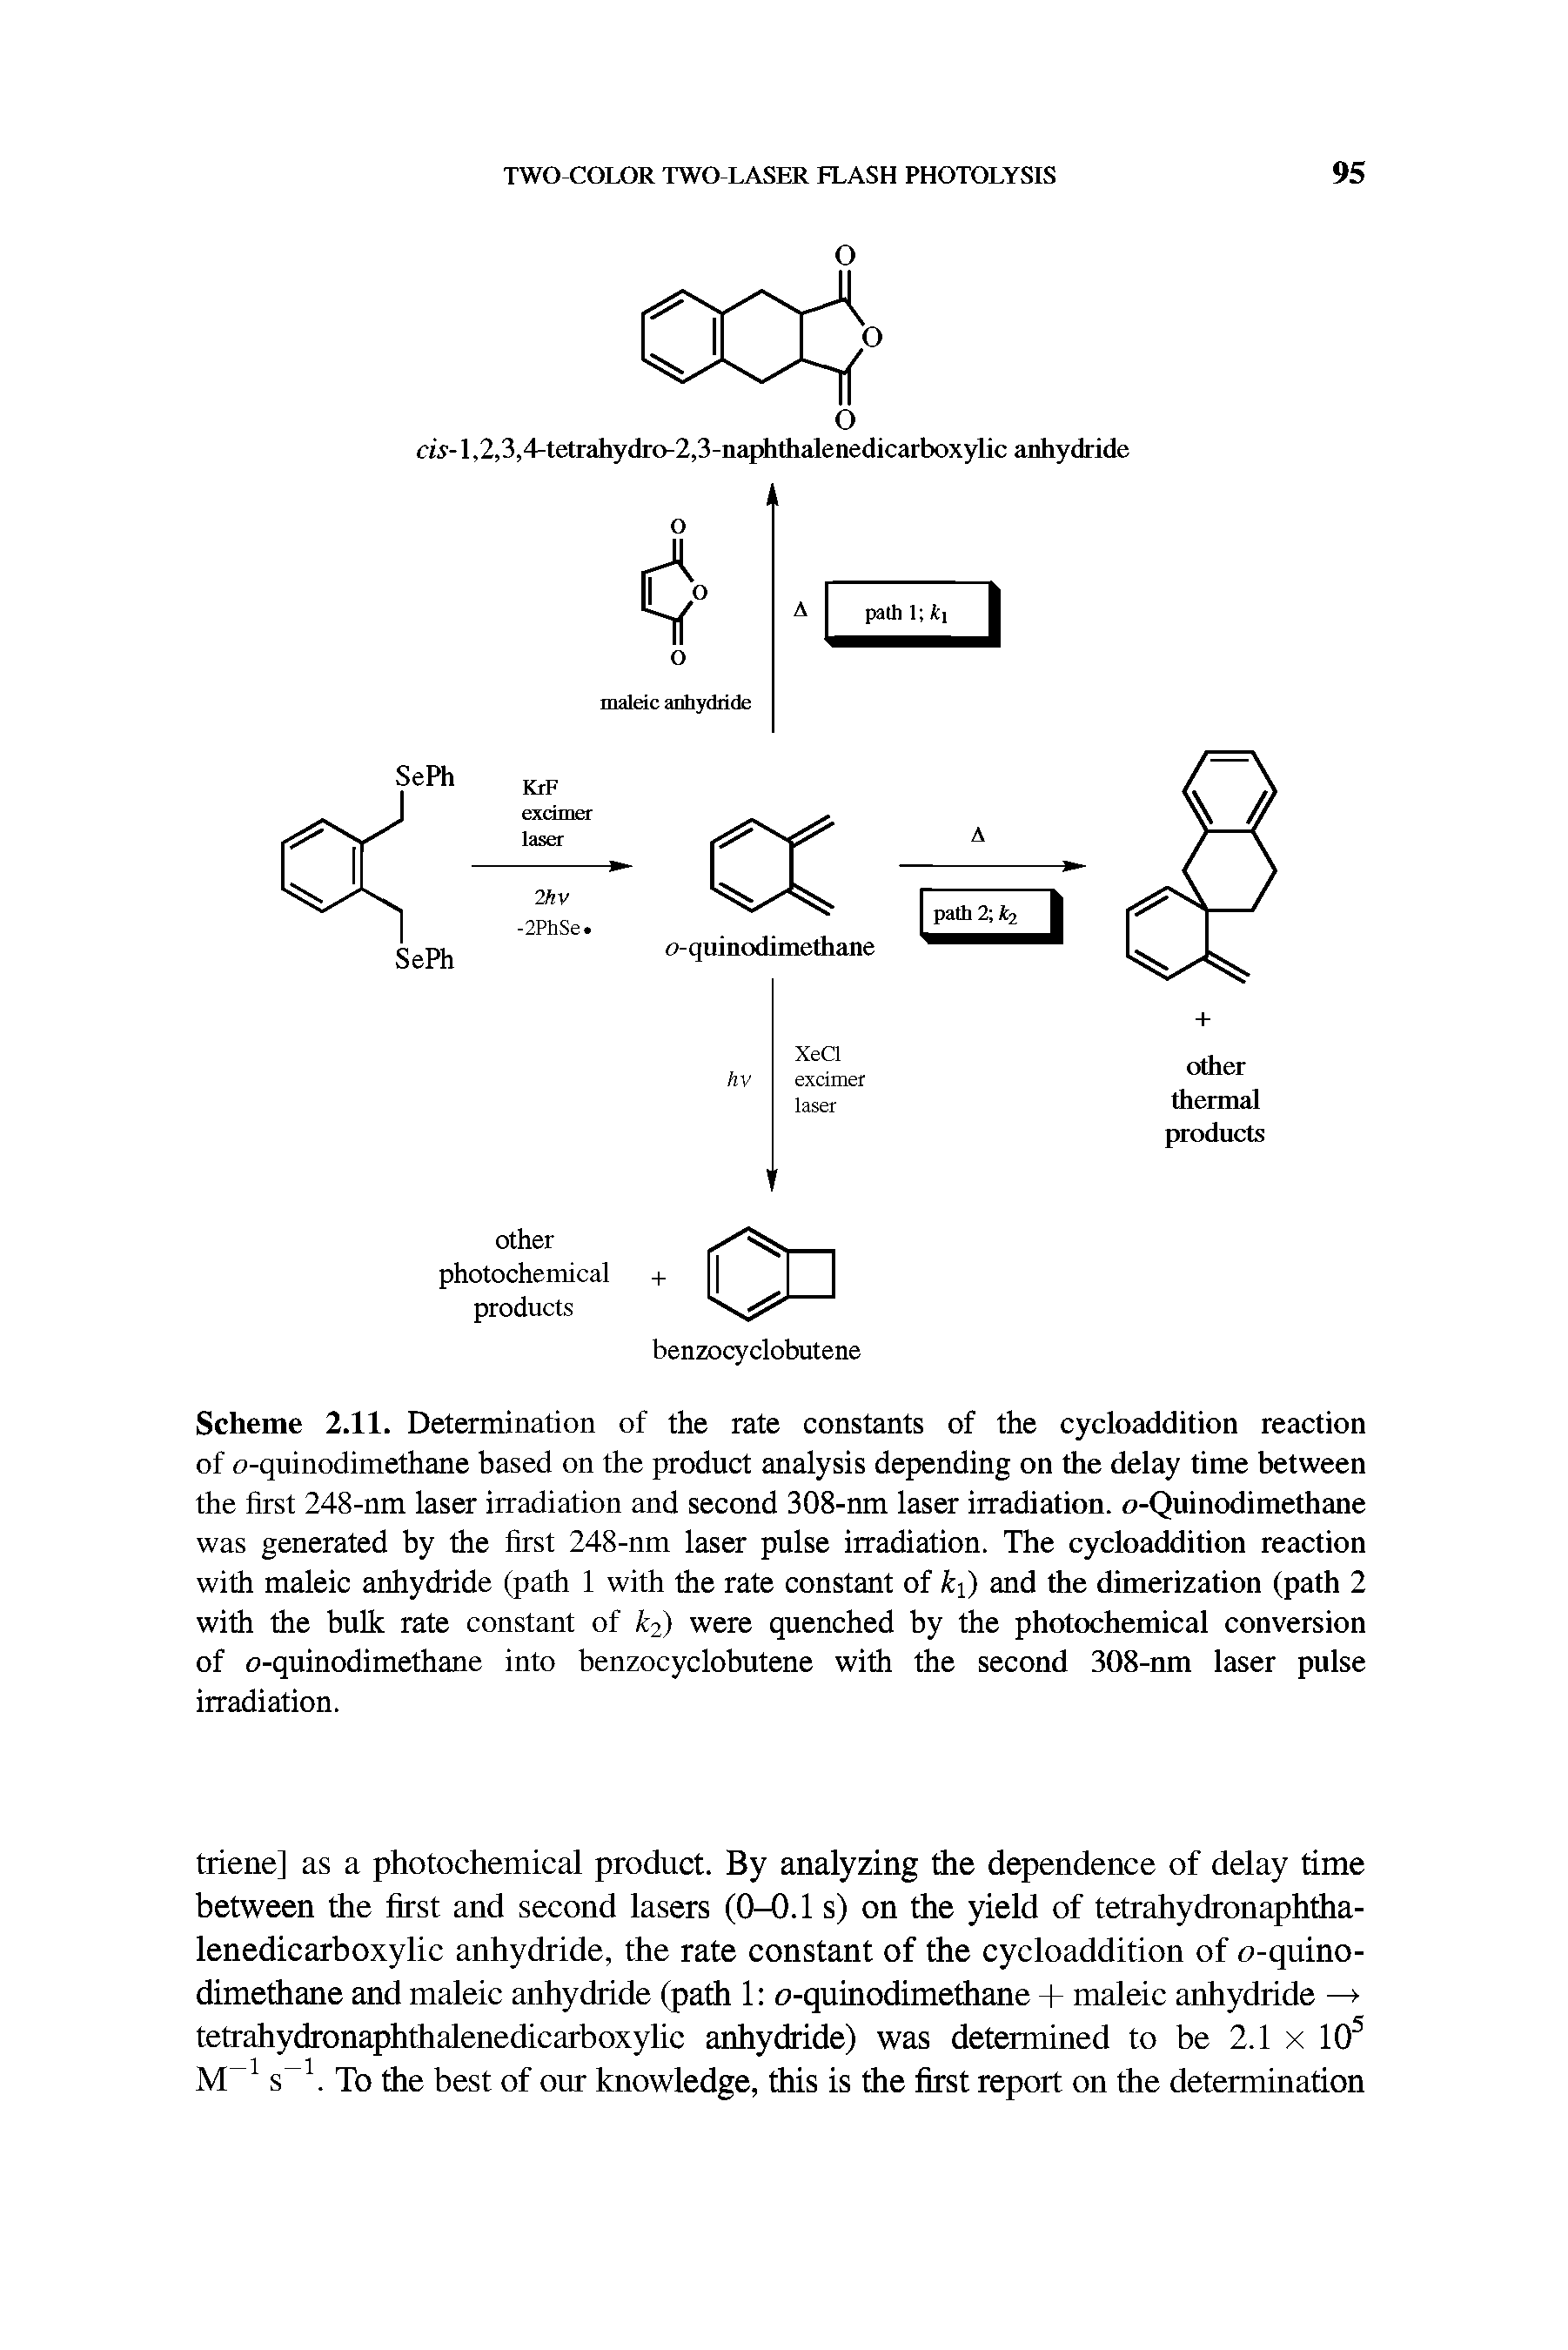 Scheme 2.11. Determination of the rate constants of the cycloaddition reaction of o-quinodimethane based on the product analysis depending on the delay time between the first 248-nm laser irradiation and second 308-nm laser irradiation. o-Quinodimethane was generated by the first 248-nm laser pulse irradiation. The cycloaddition reaction with maleic anhydride (path 1 with the rate constant of k ) and the dimerization (path 2 with the bulk rate constant of k2) were quenched by the photochemical conversion of o-quinodimethane into benzocyclobutene with the second 308-nm laser pulse irradiation.